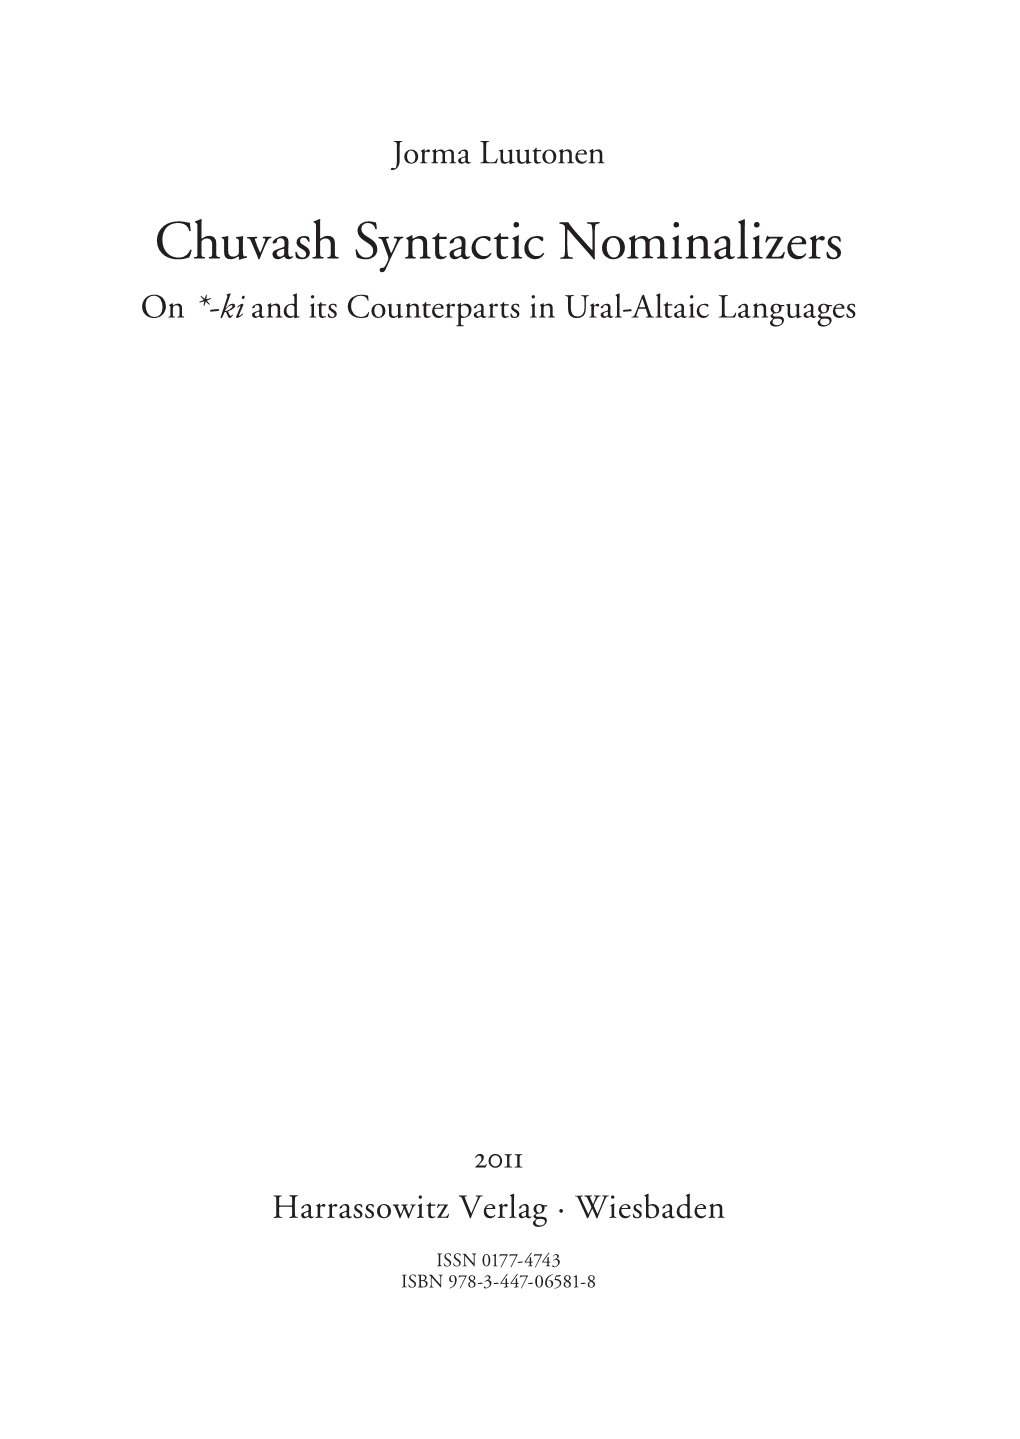 Chuvash Syntactic Nominalizers on *-Ki and Its Counterparts in Ural-Altaic Languages